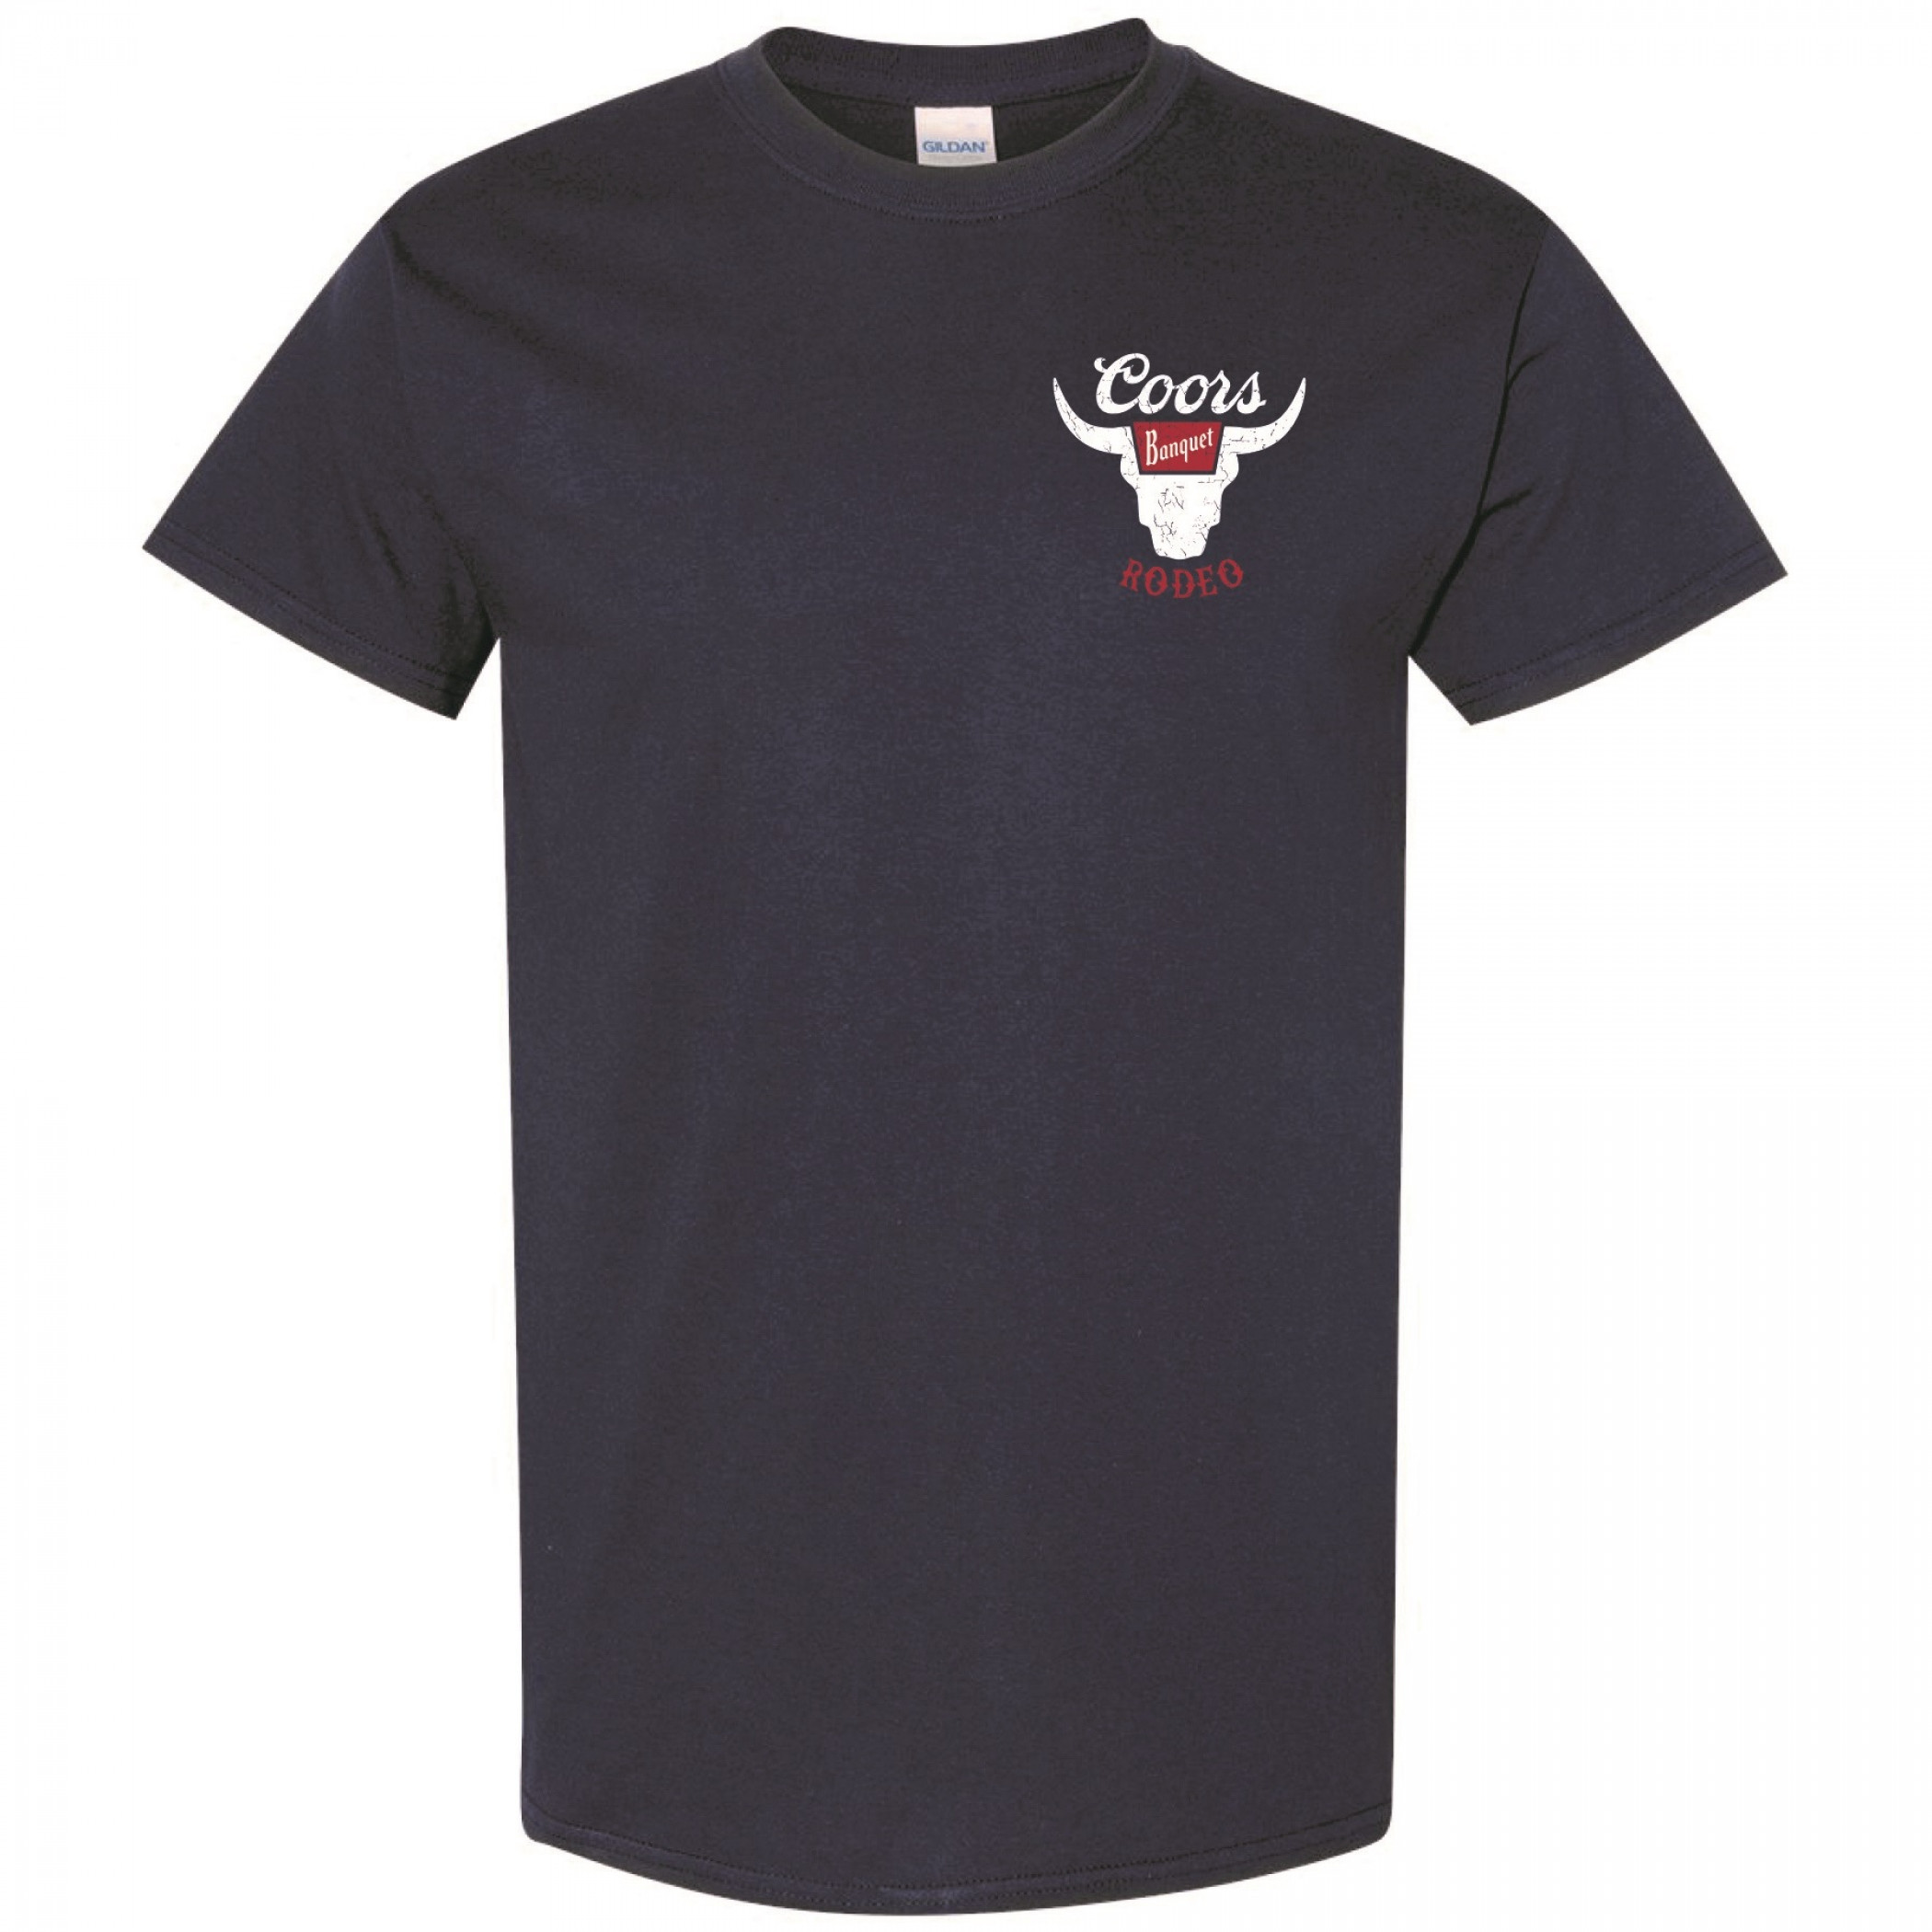 Coors Banquet Rodeo Navy Blue Colorway T-Shirt